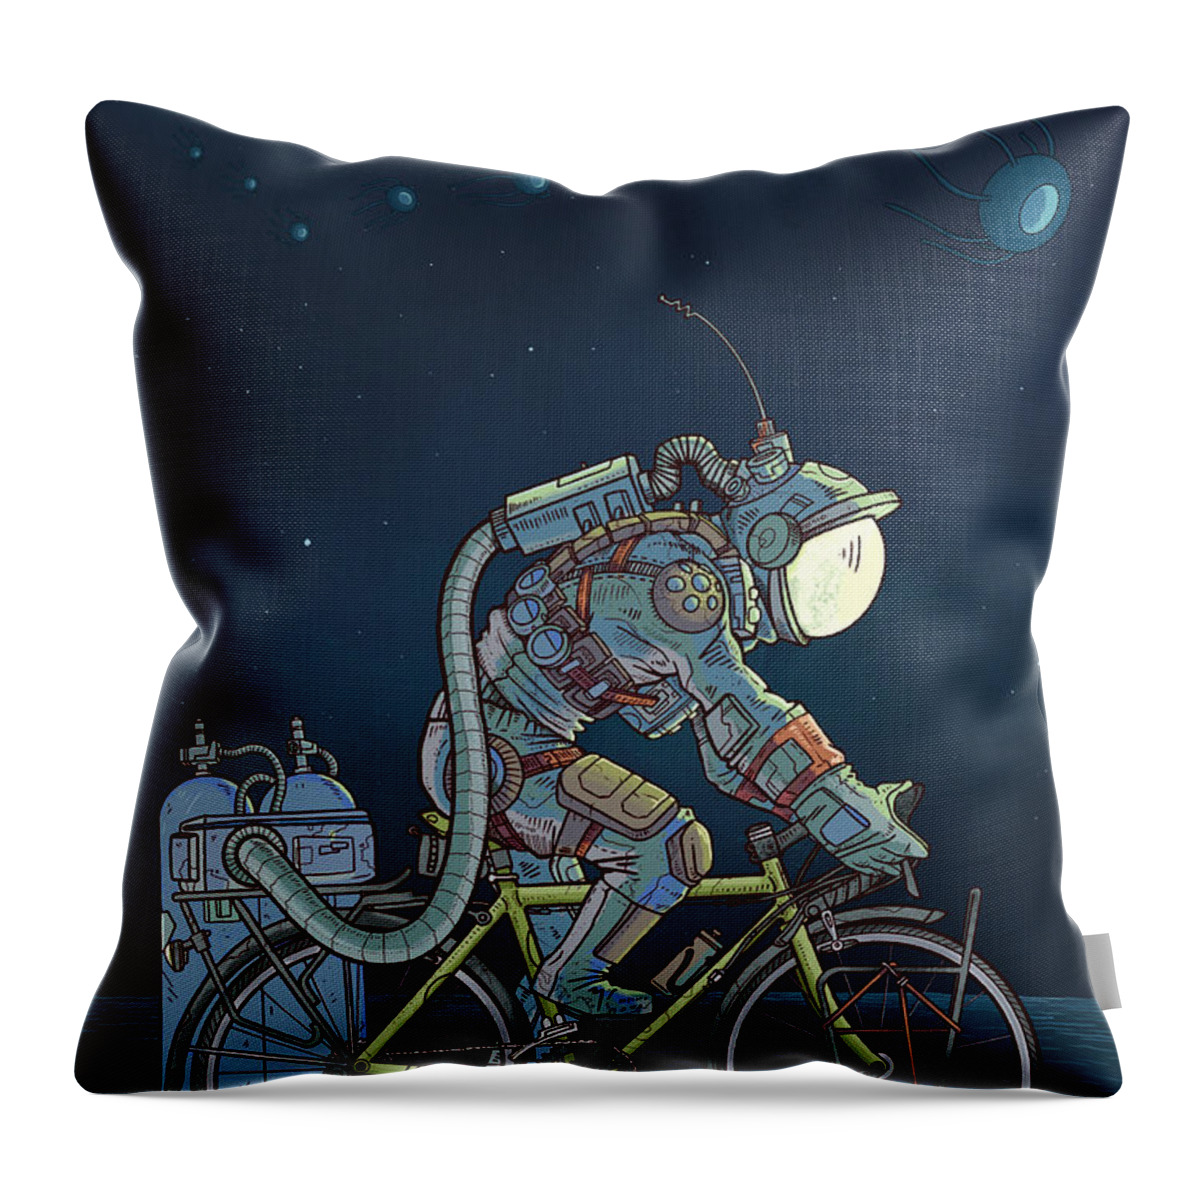 Digitalart Space Scifi Alien Bikes Cycling Spacesuit Scifiart Throw Pillow featuring the digital art LFT, -260 Degrees by EvanArt - Evan Miller